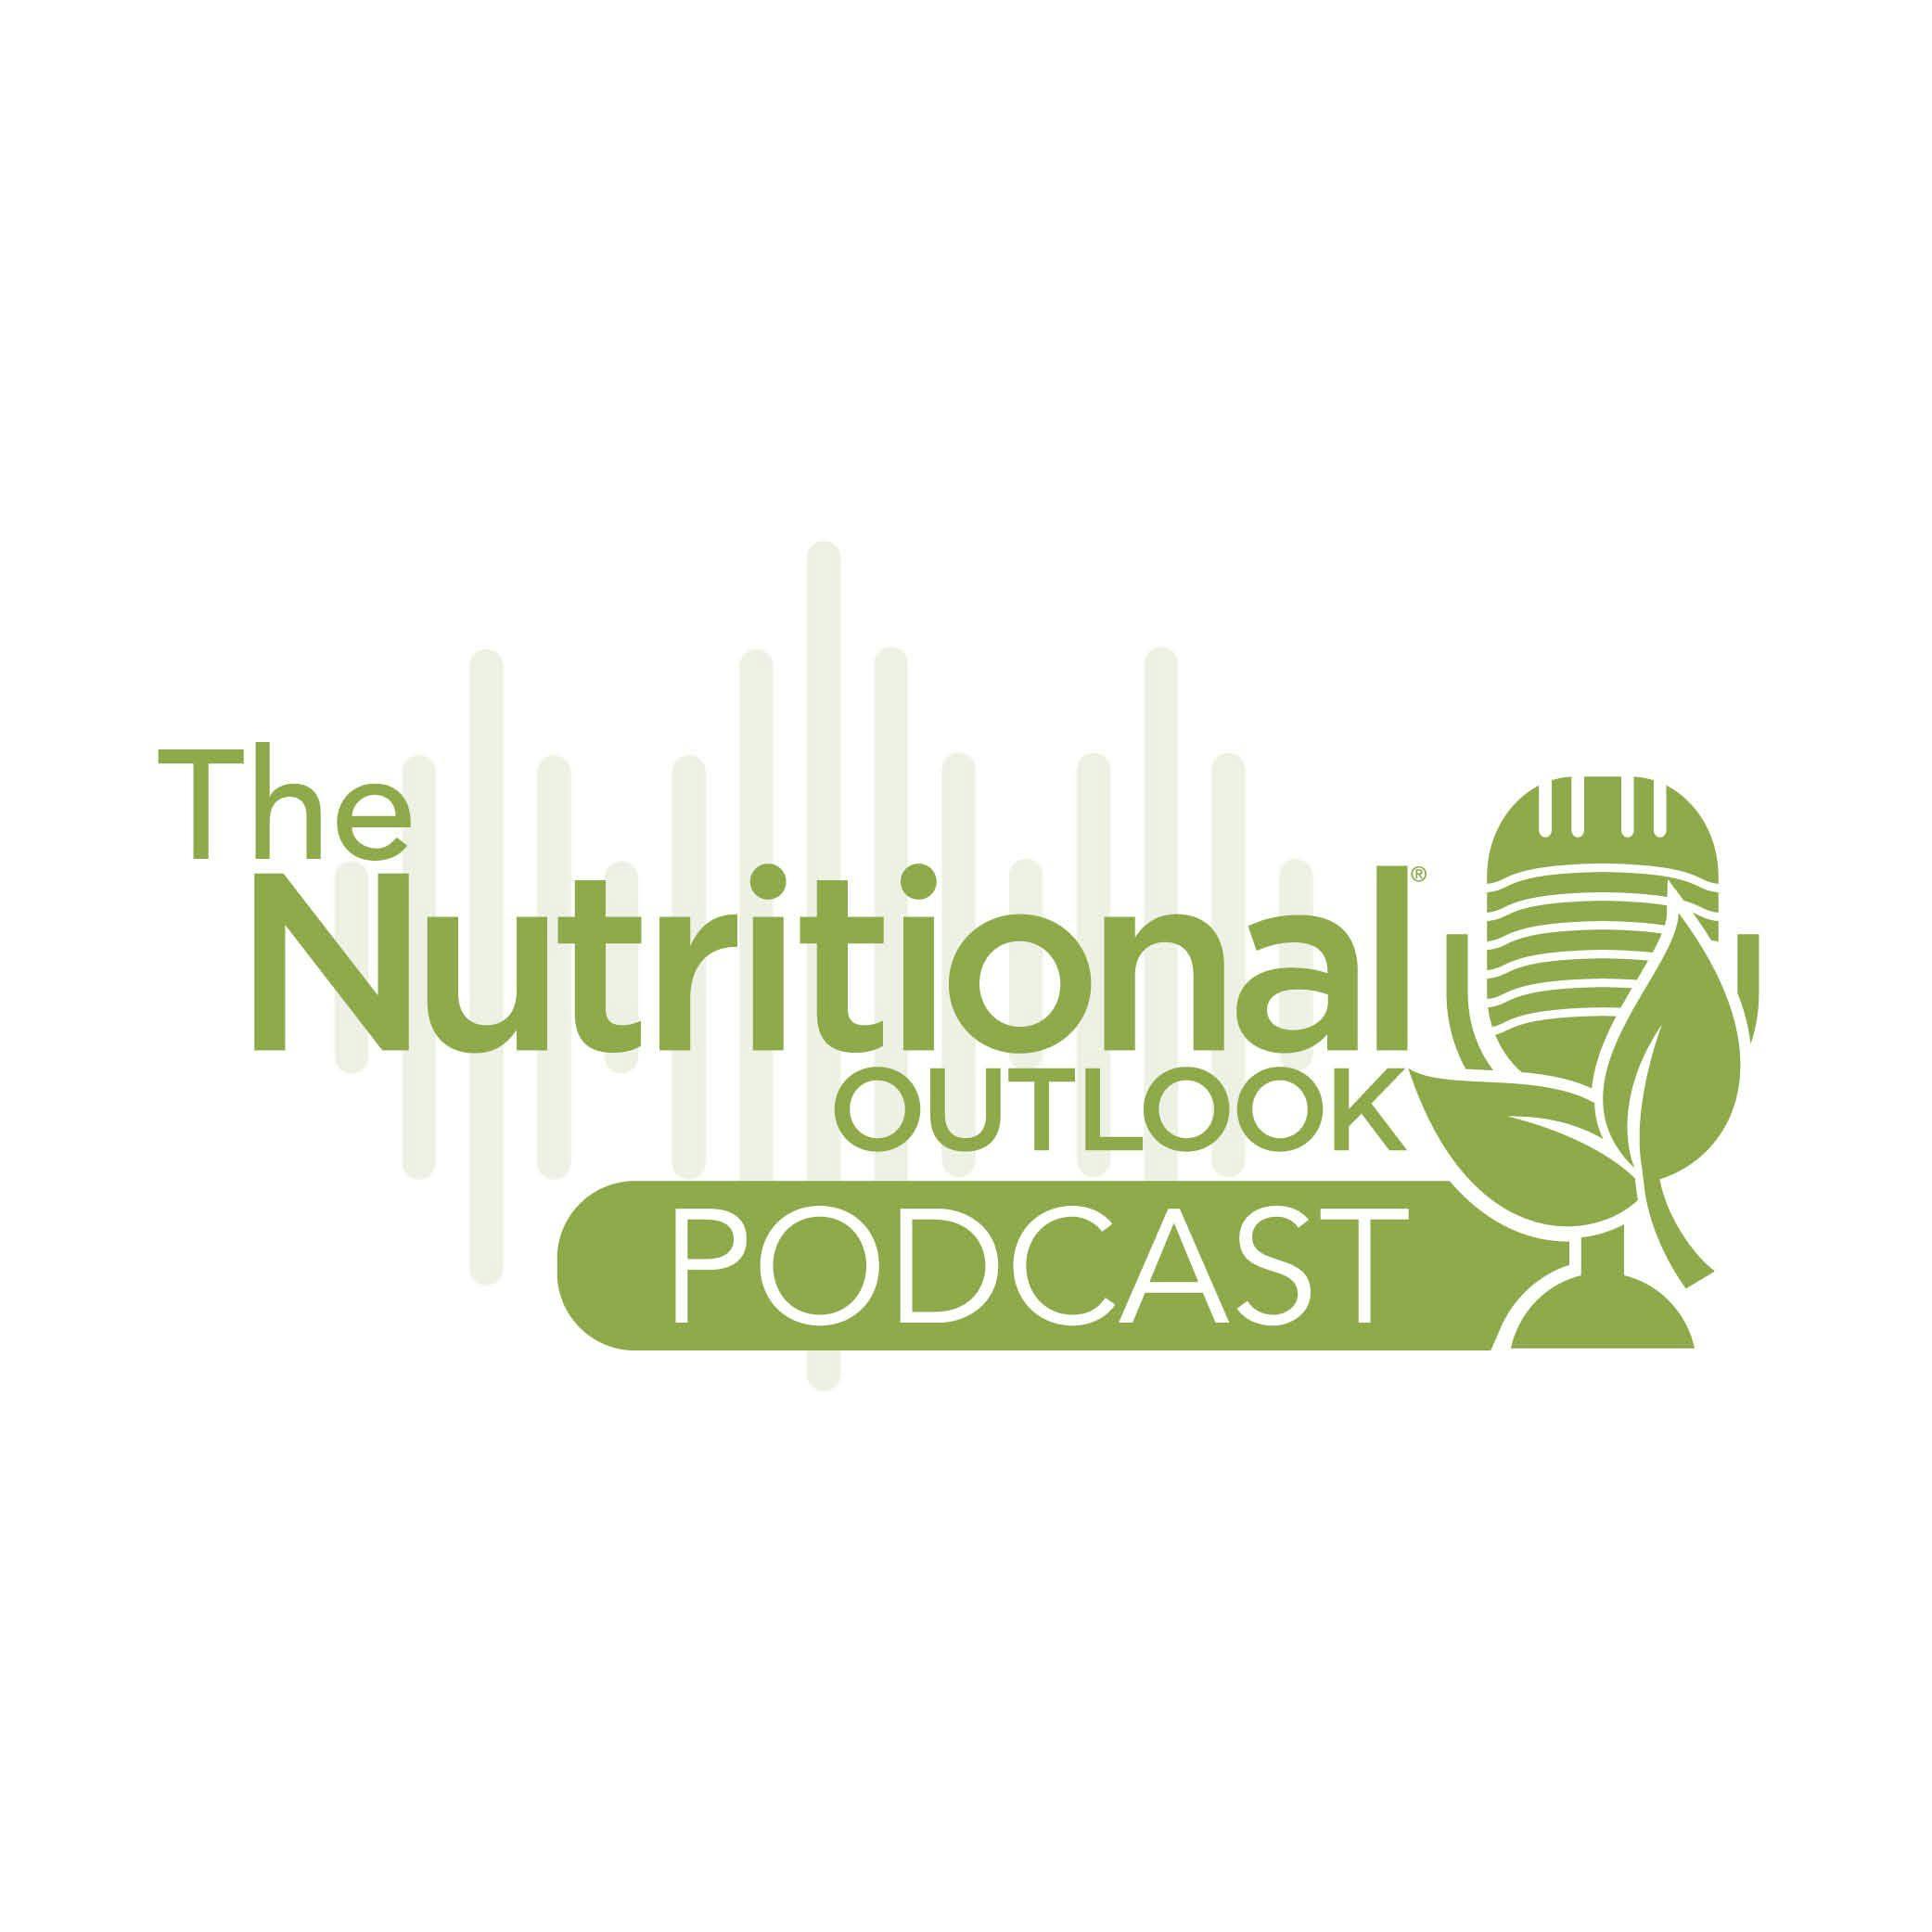 The Nutritional Outlook Podcast logo